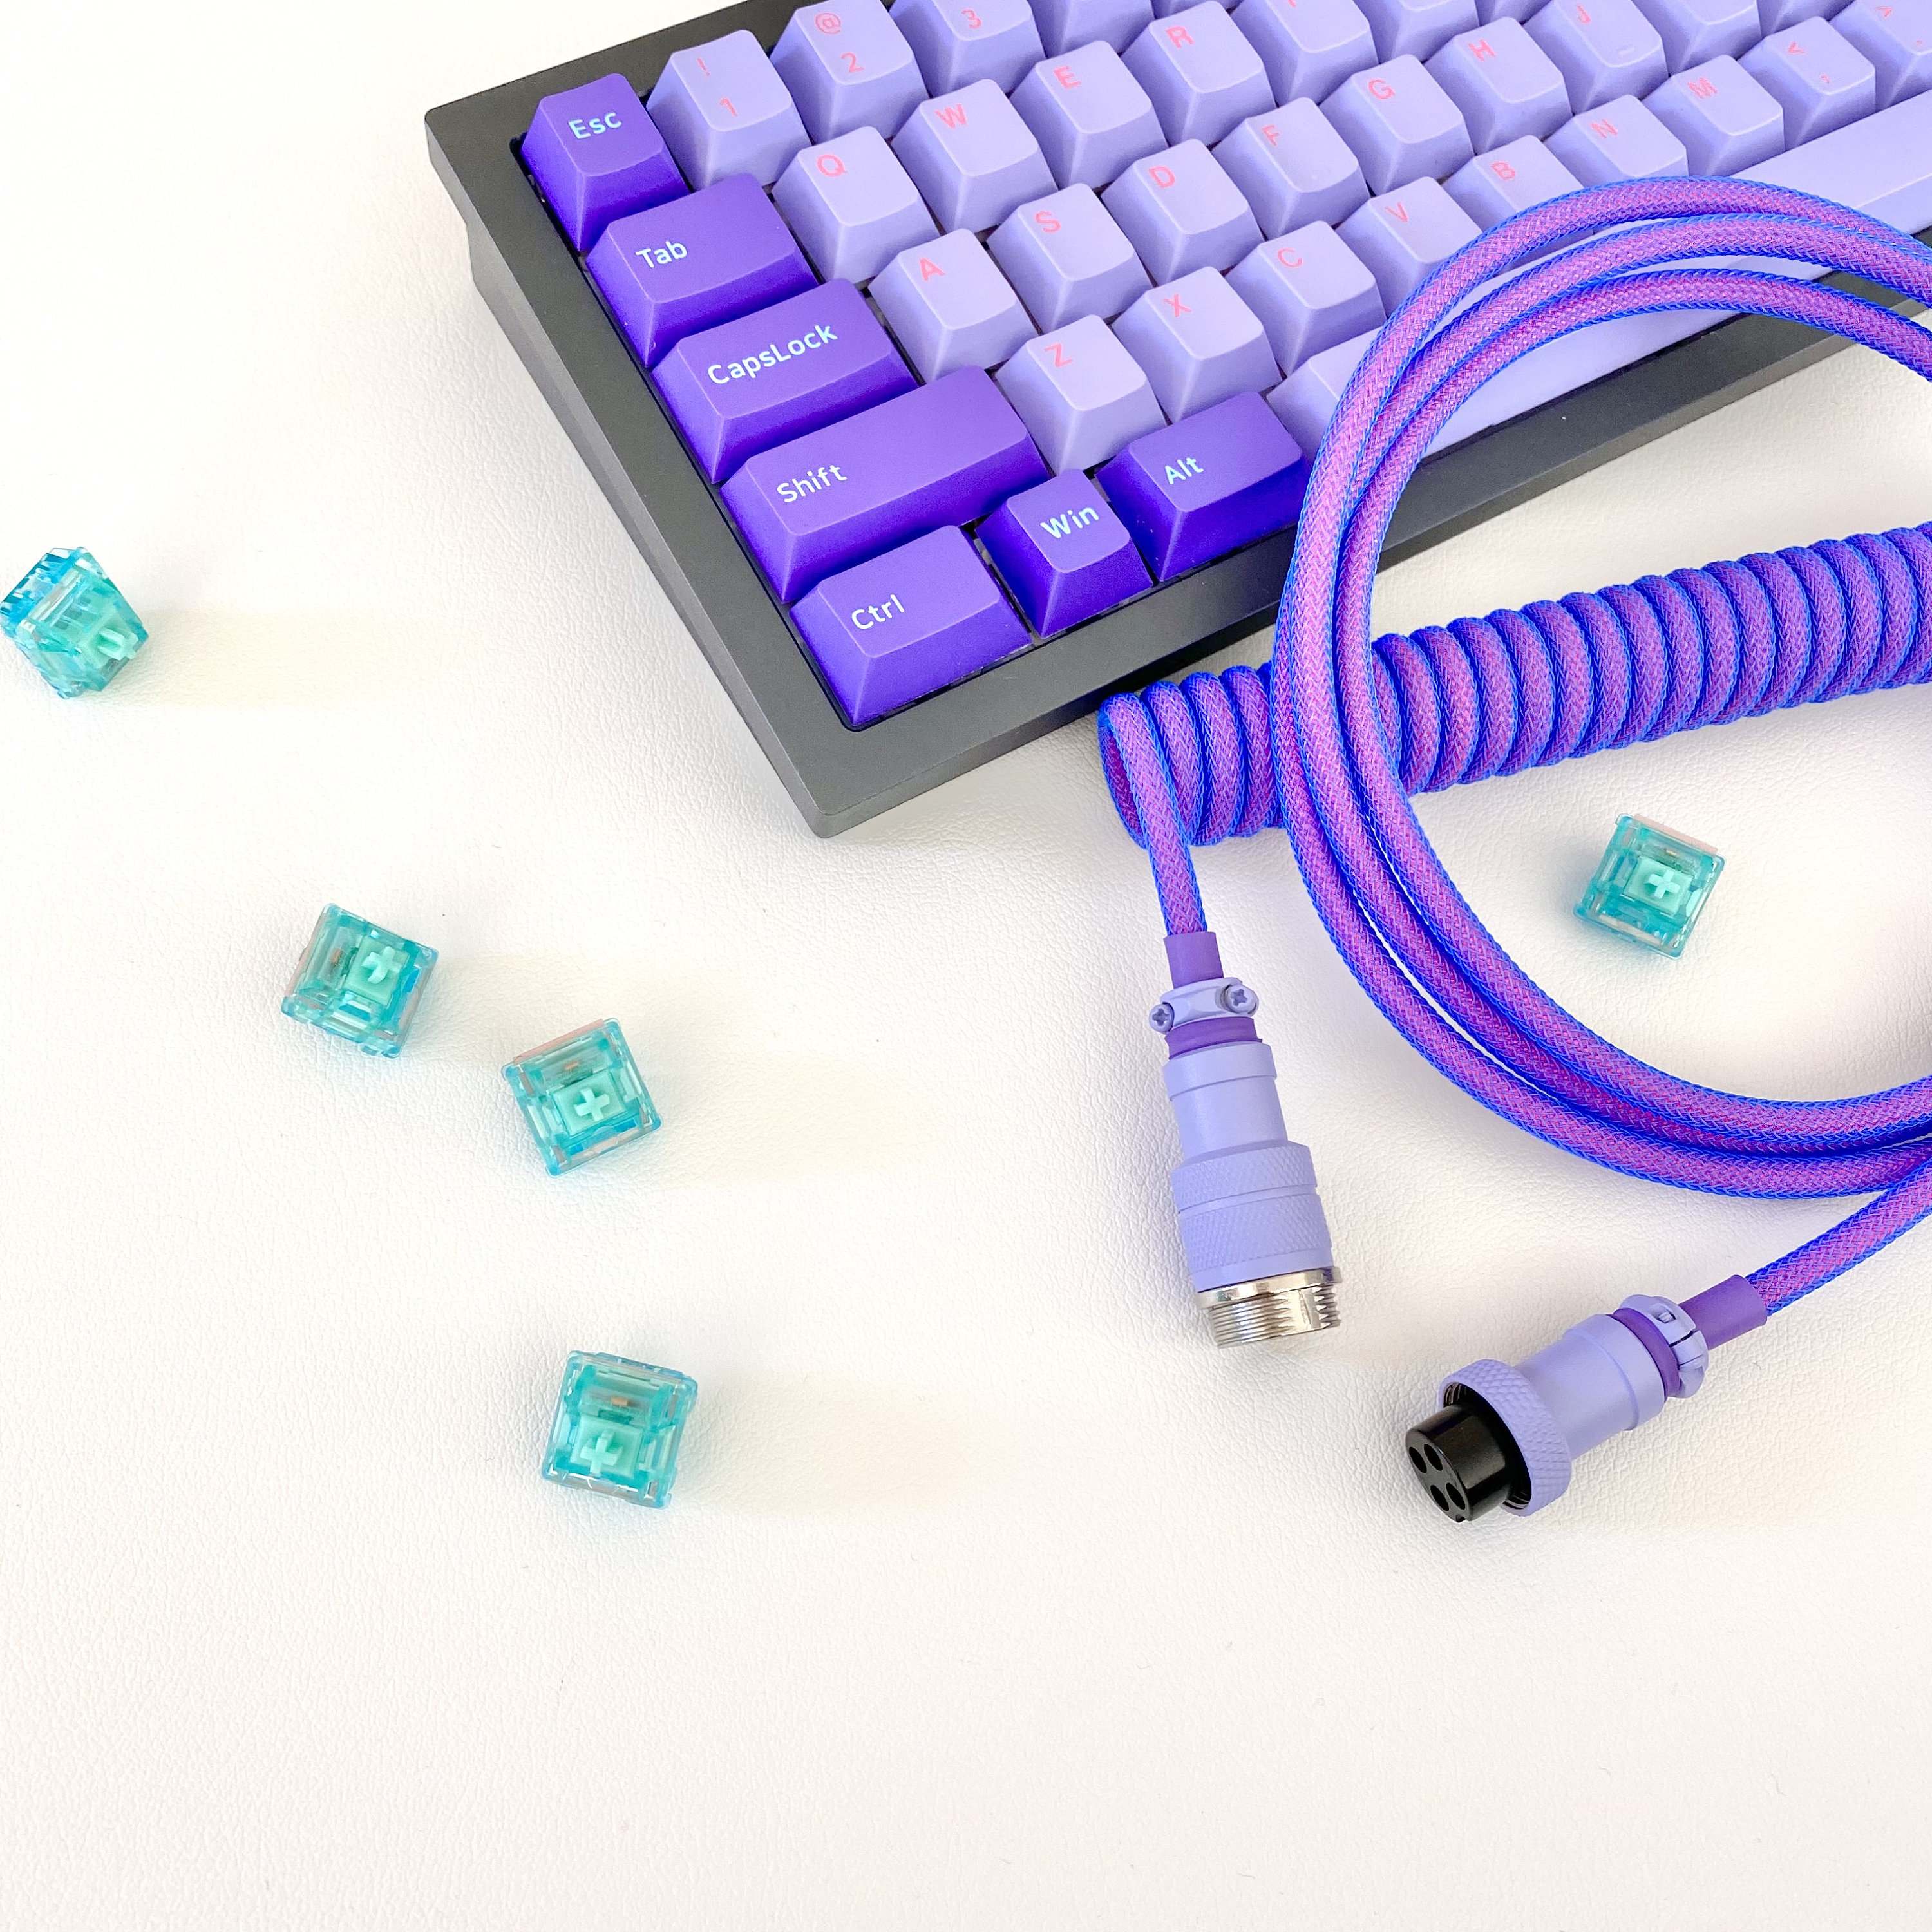 How to Solder USB C, Micro, Mini, and A Connectors for Custom Keyboard  Cables 